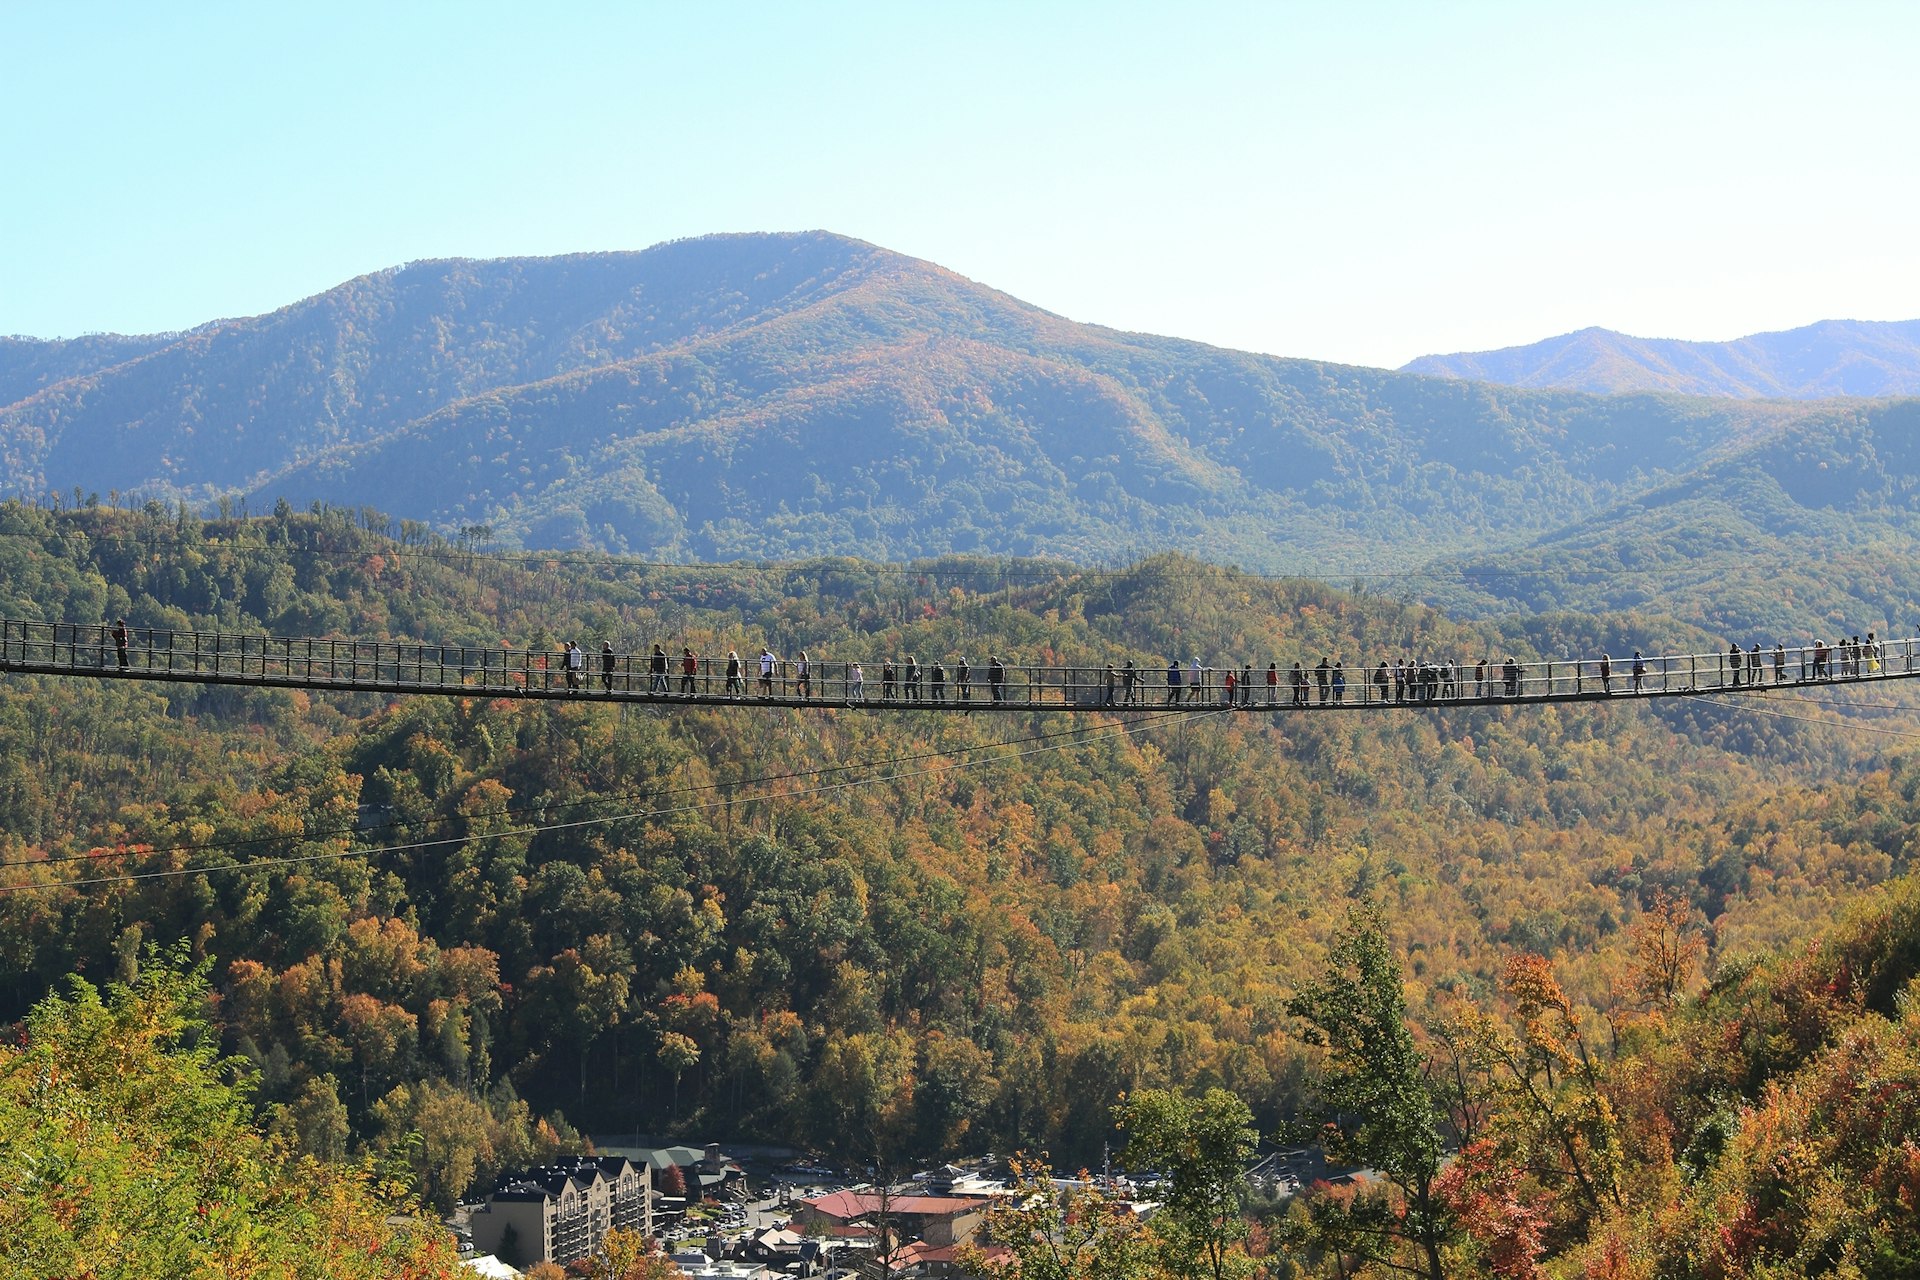 People walk across the SkyBridge in Gatlinburg with mountains and fall leaves in the background